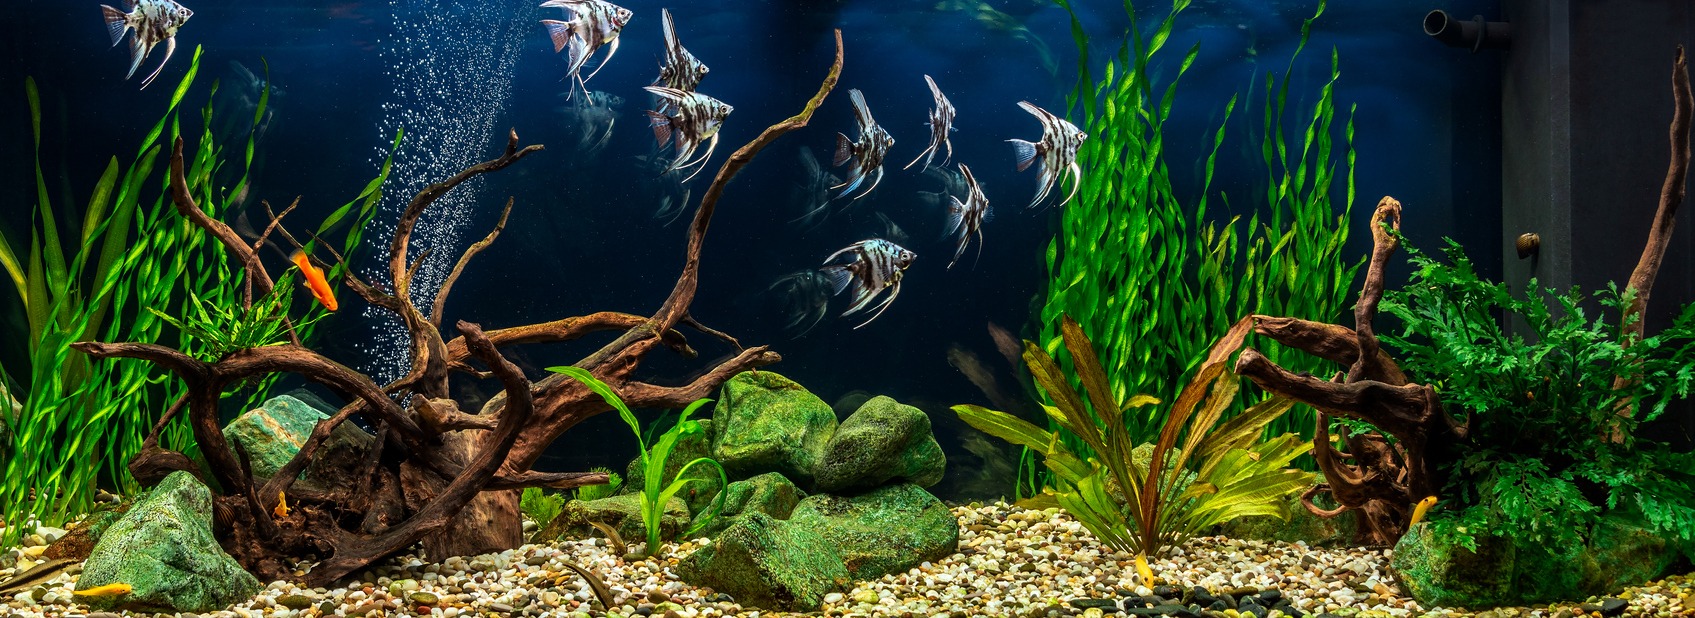 10 Tips to Keep Your Aquarium Clean